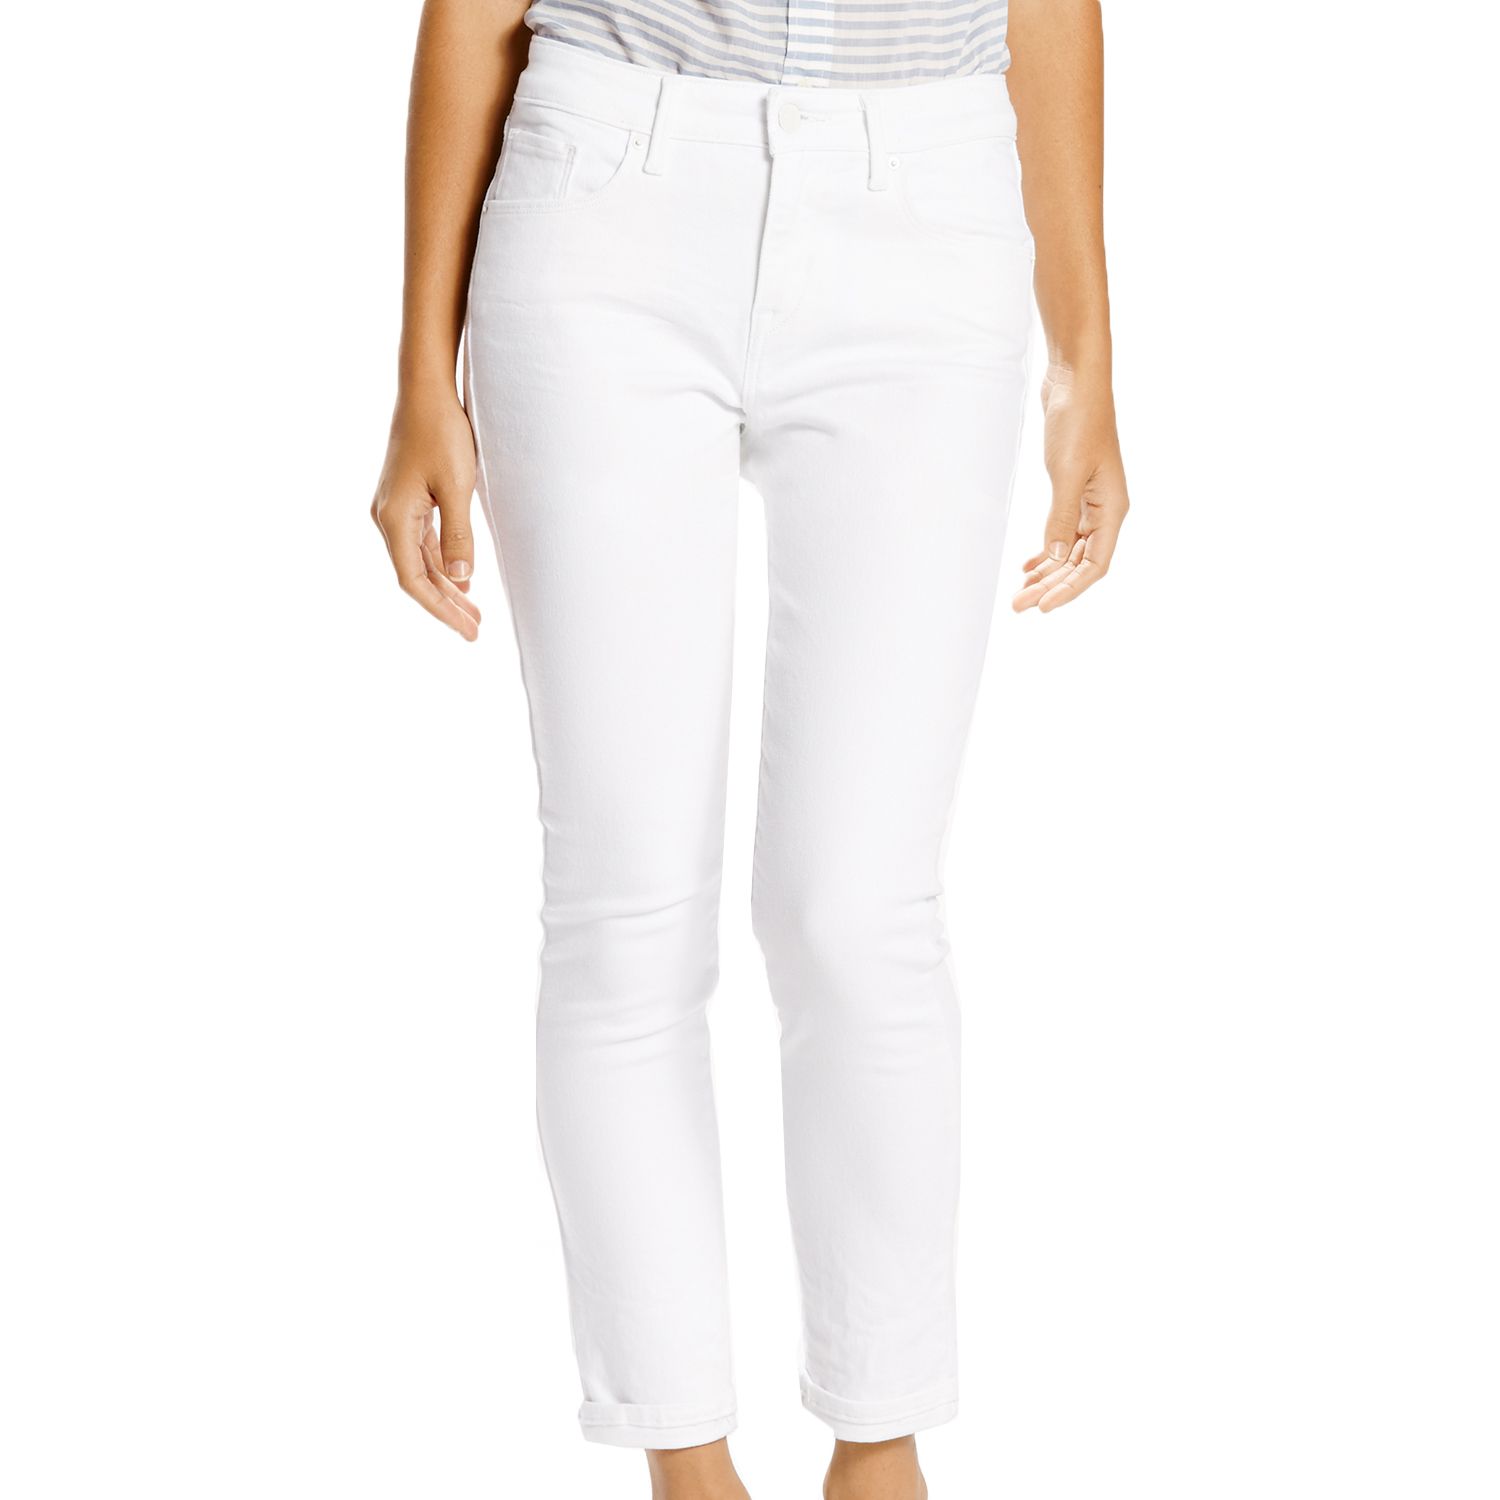 levi's cropped skinny jeans